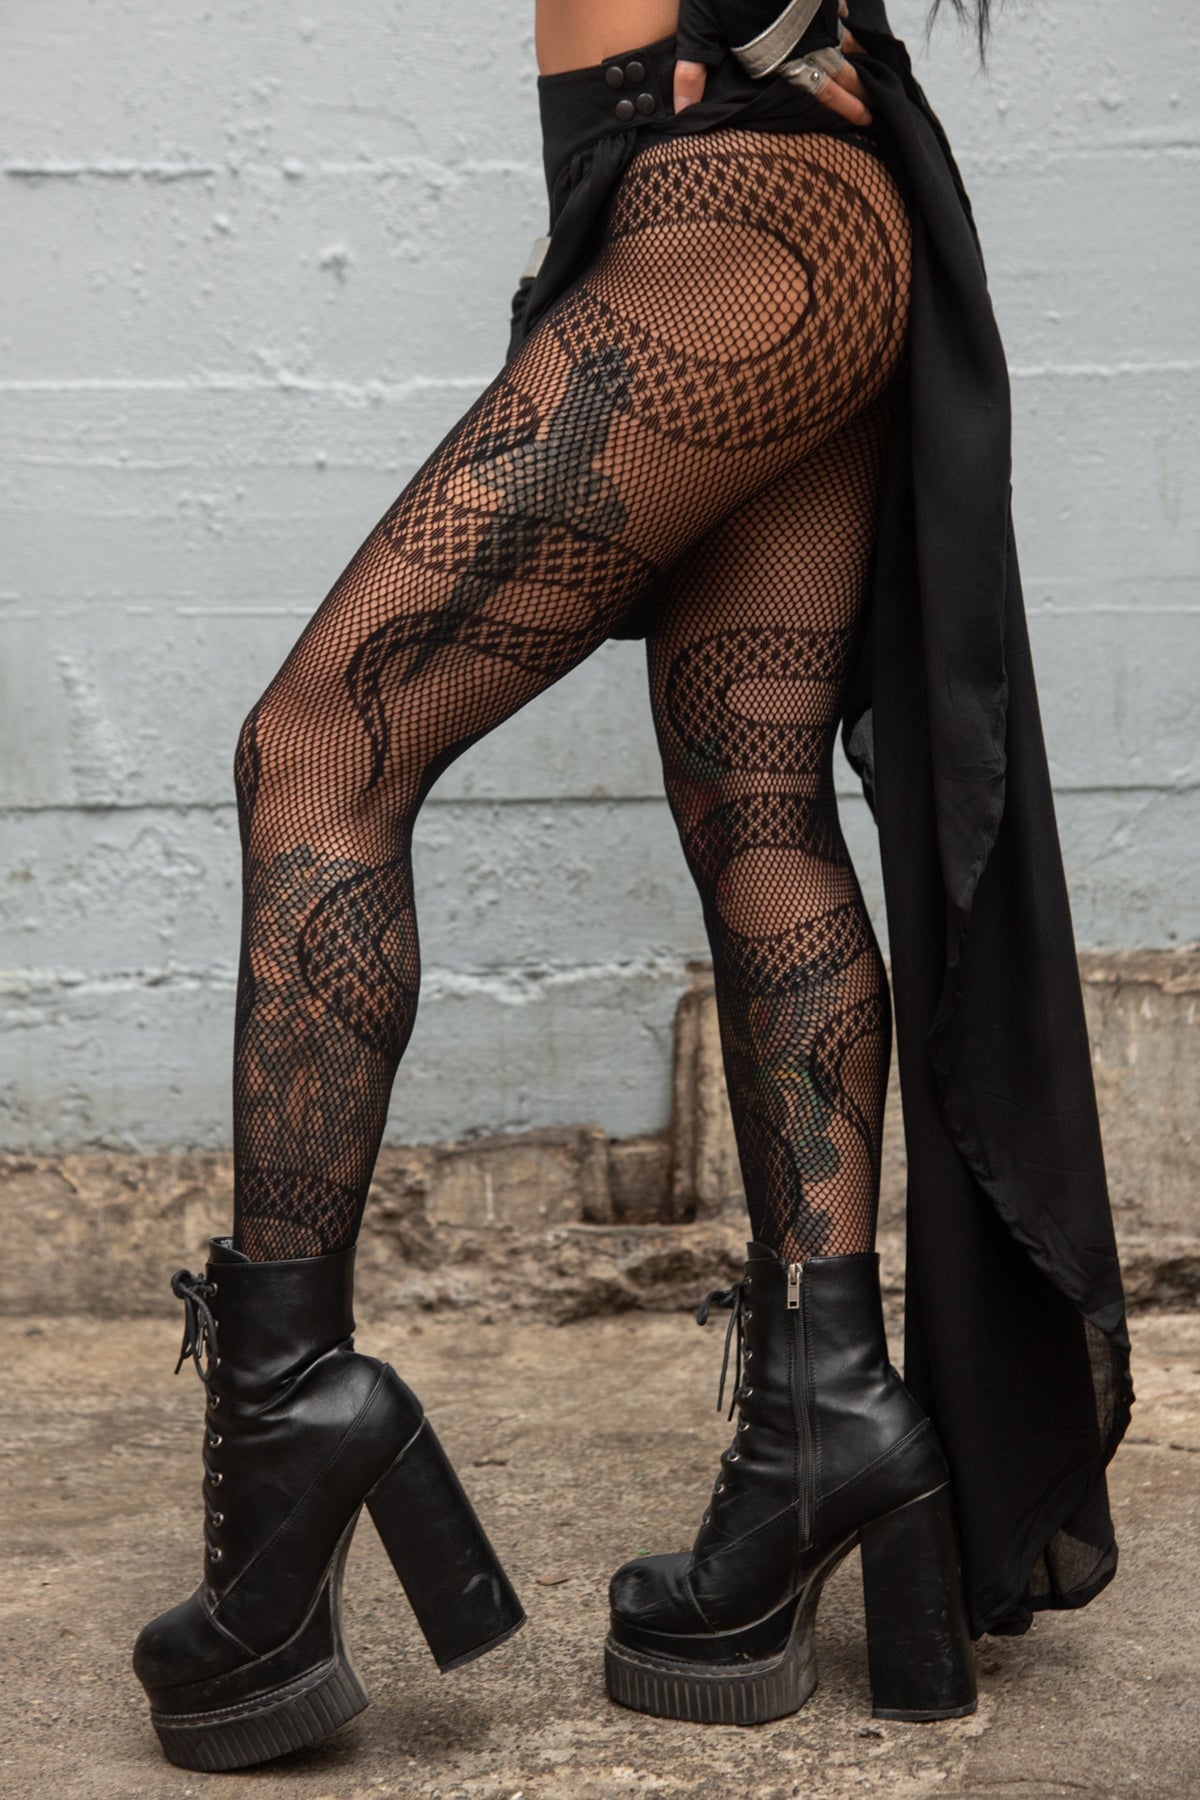 LACE AND FISHNET TIGHTS